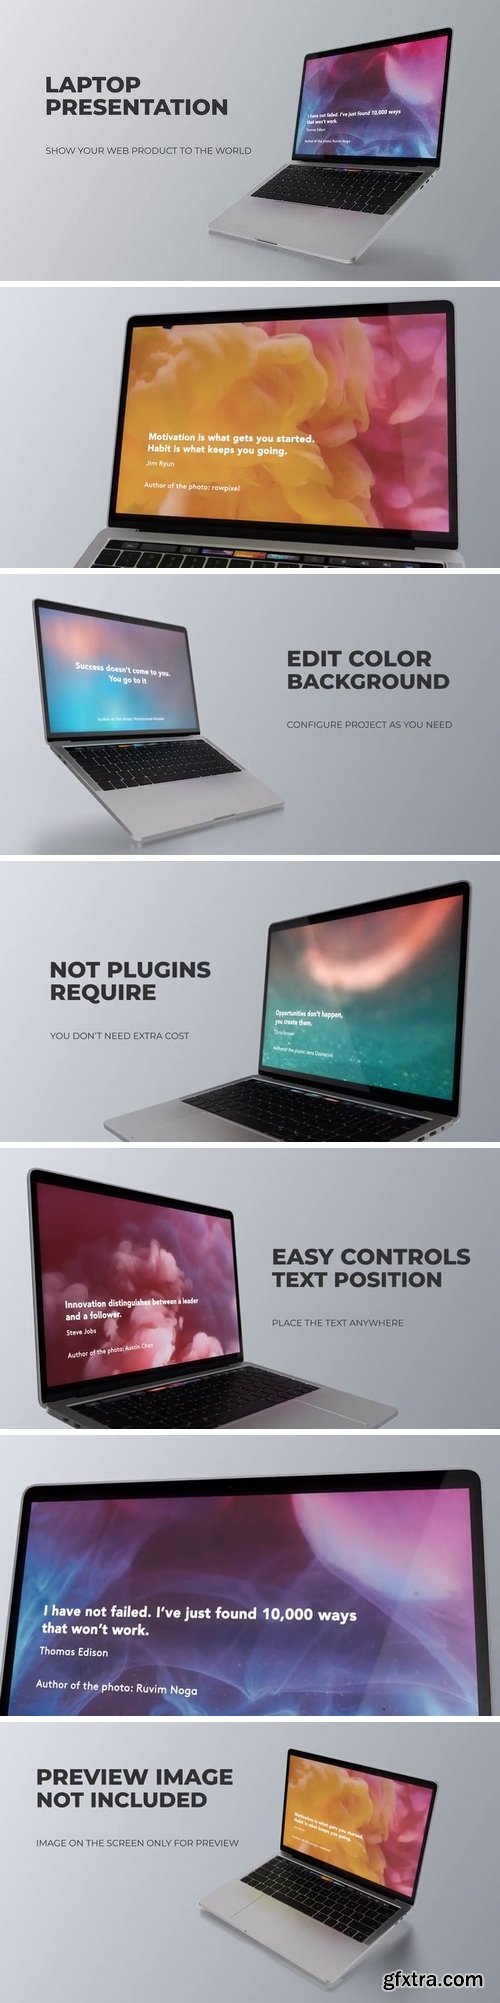 MA -  Laptop Presentation After Effects Templates 149187